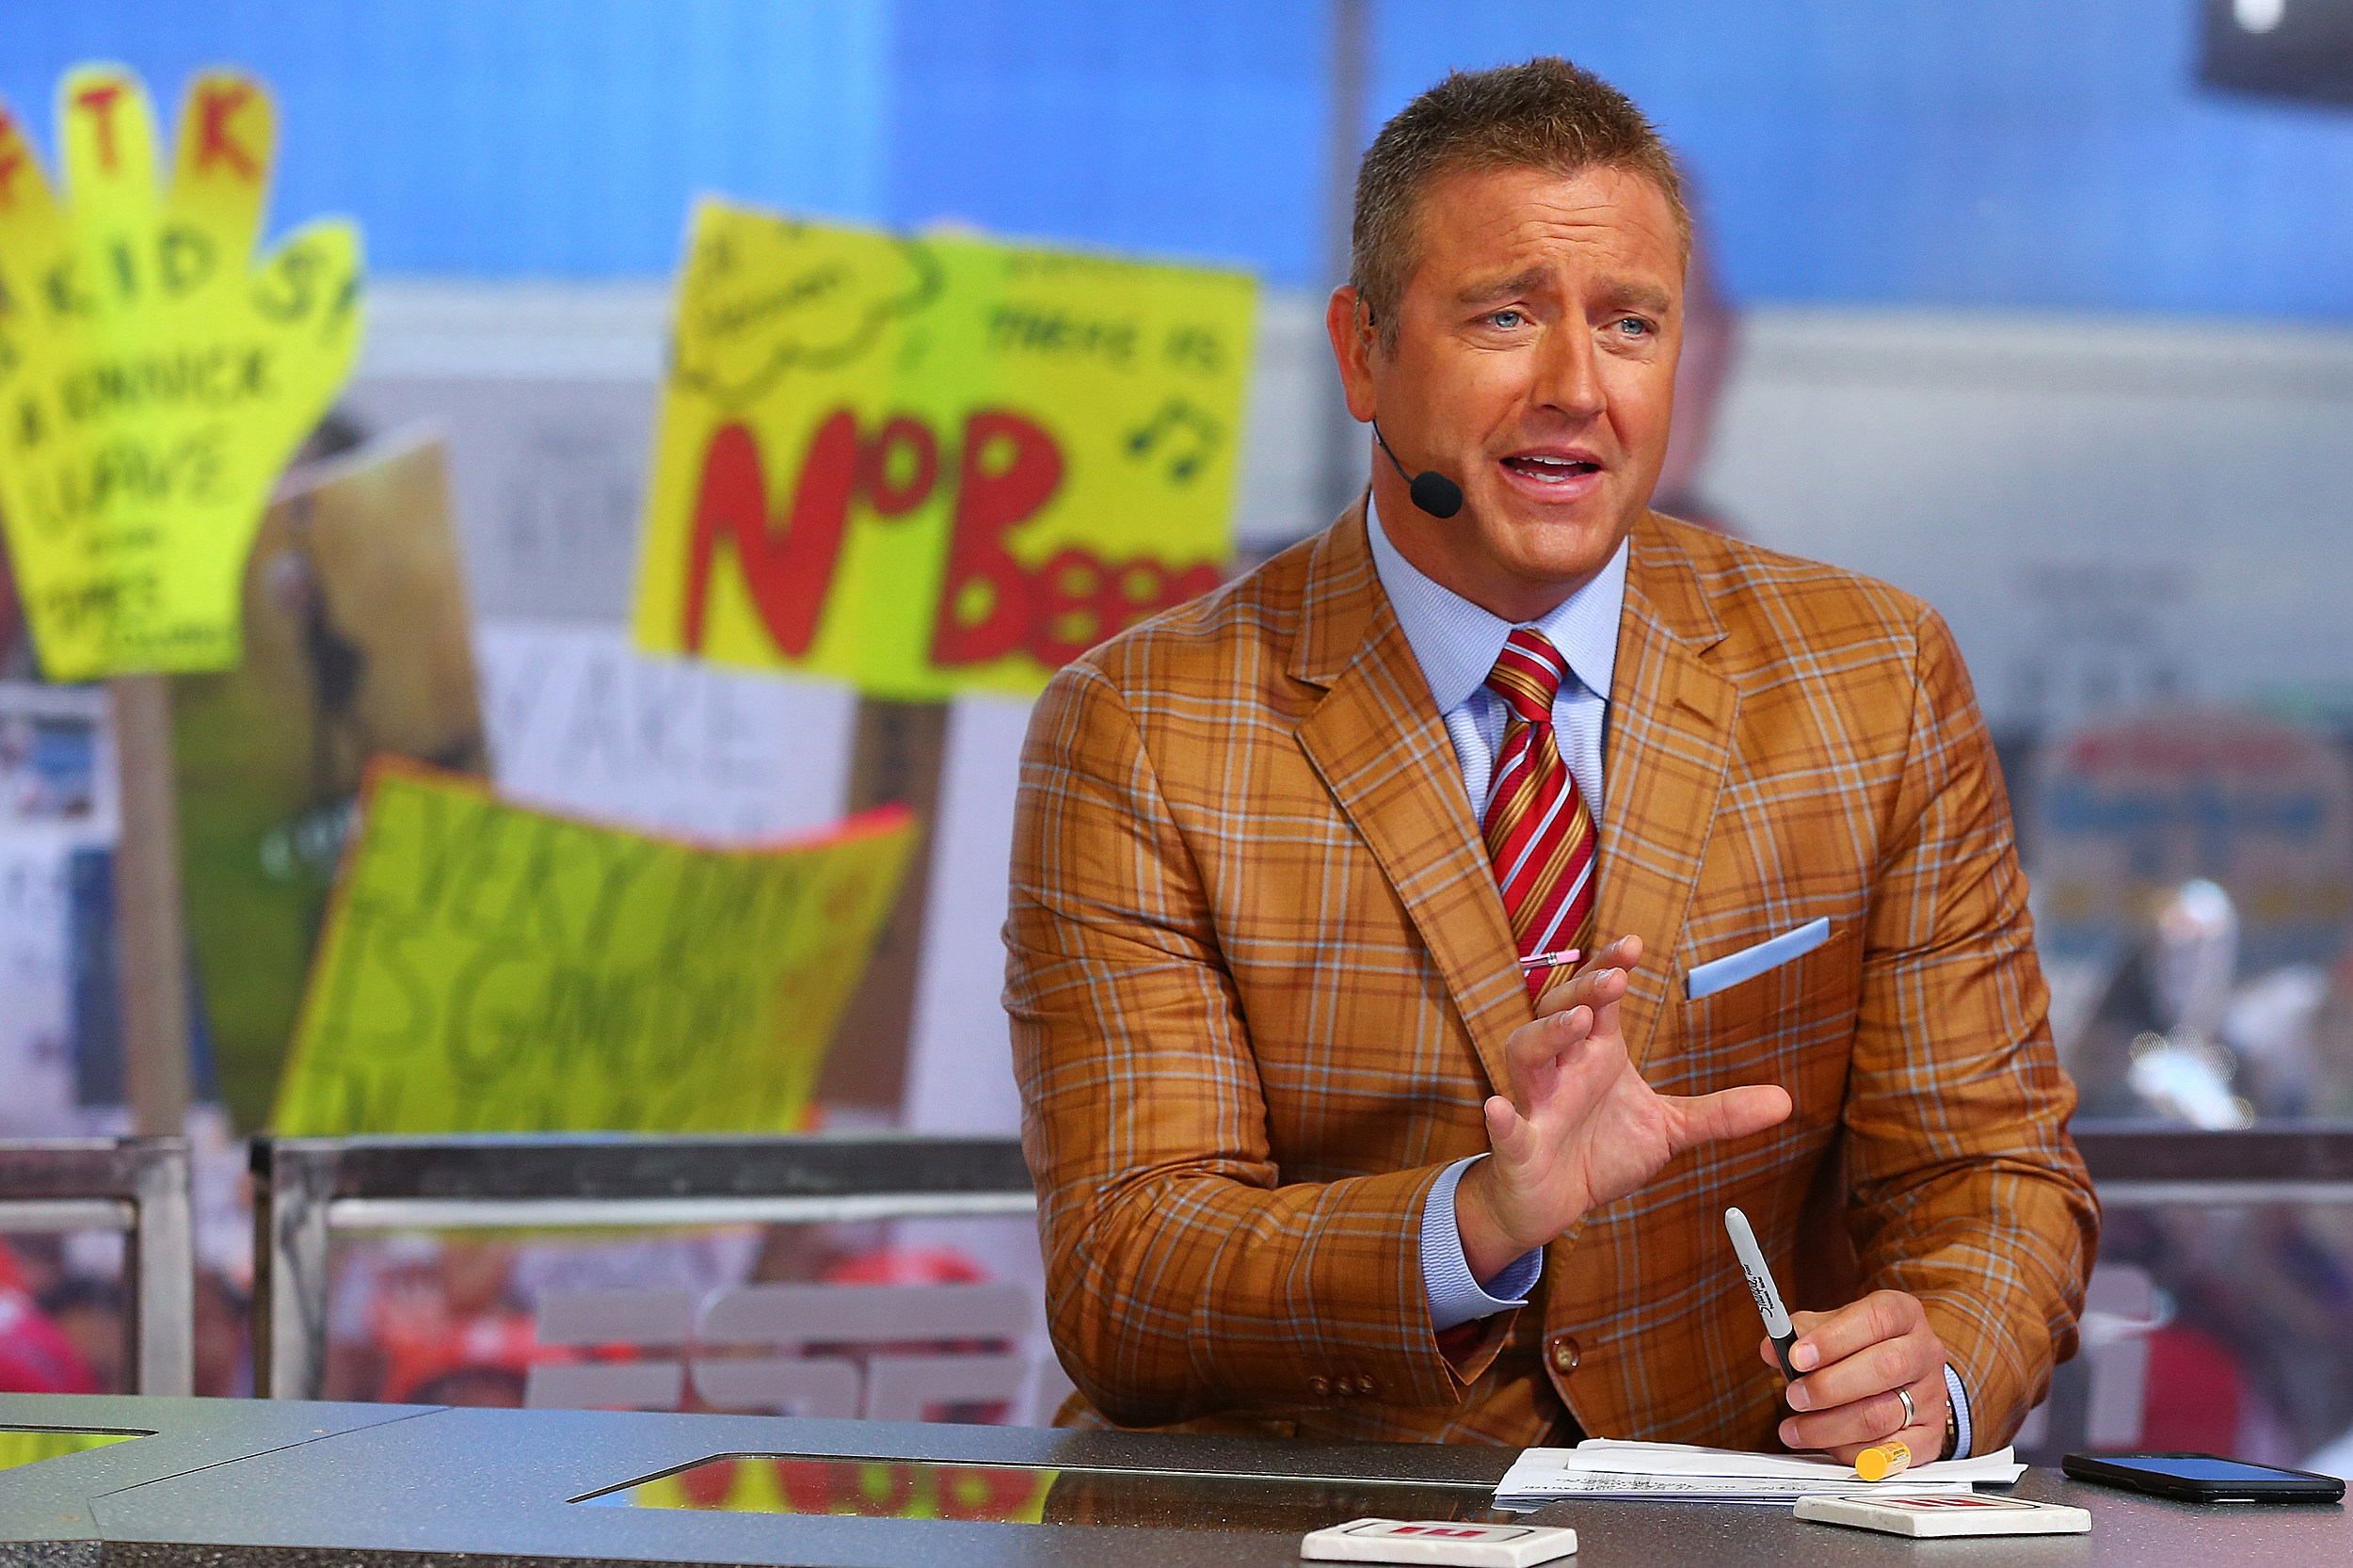 Kirk Herbstreit Joining NFL Broadcast Team as Lead Color Analyst